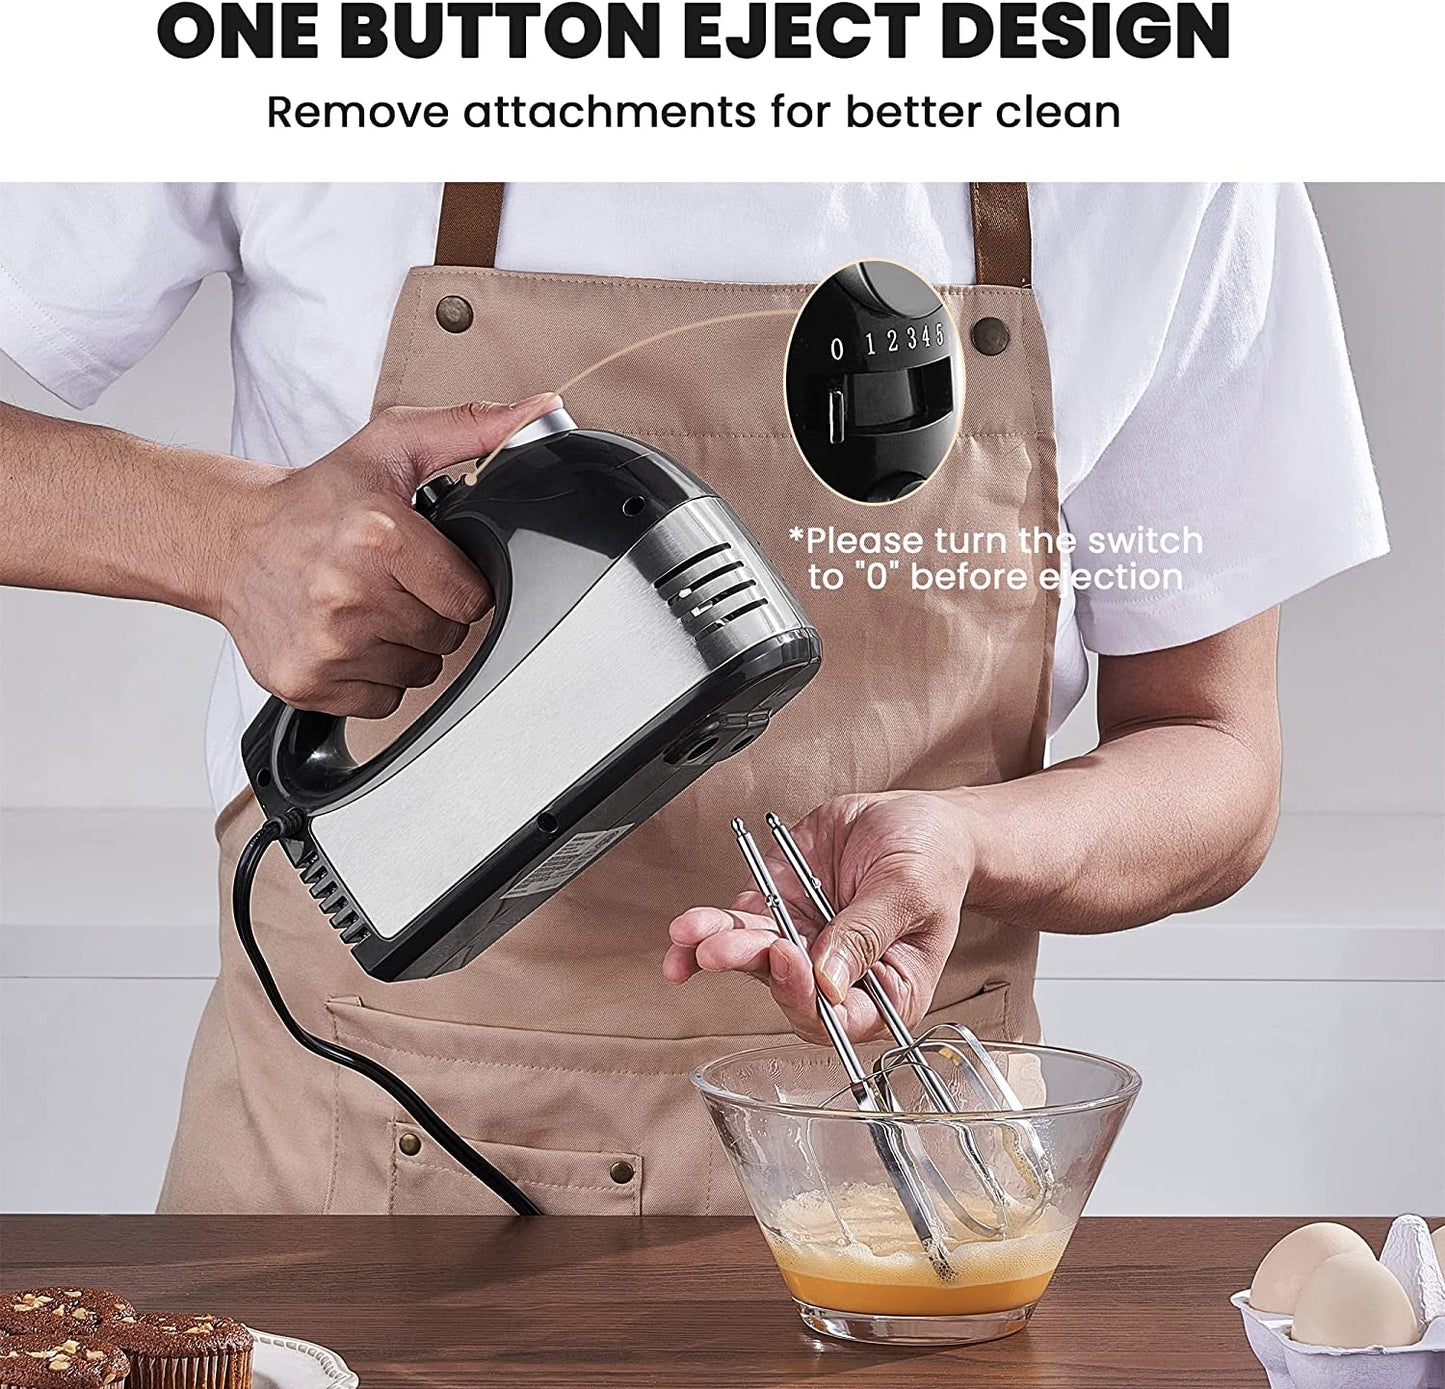 Hand Mixer Electric,  5-Speed Hand Mixer with Turbo Handheld Kitchen Mixer Includes Beaters, Dough Hooks and Storage Case (Black)